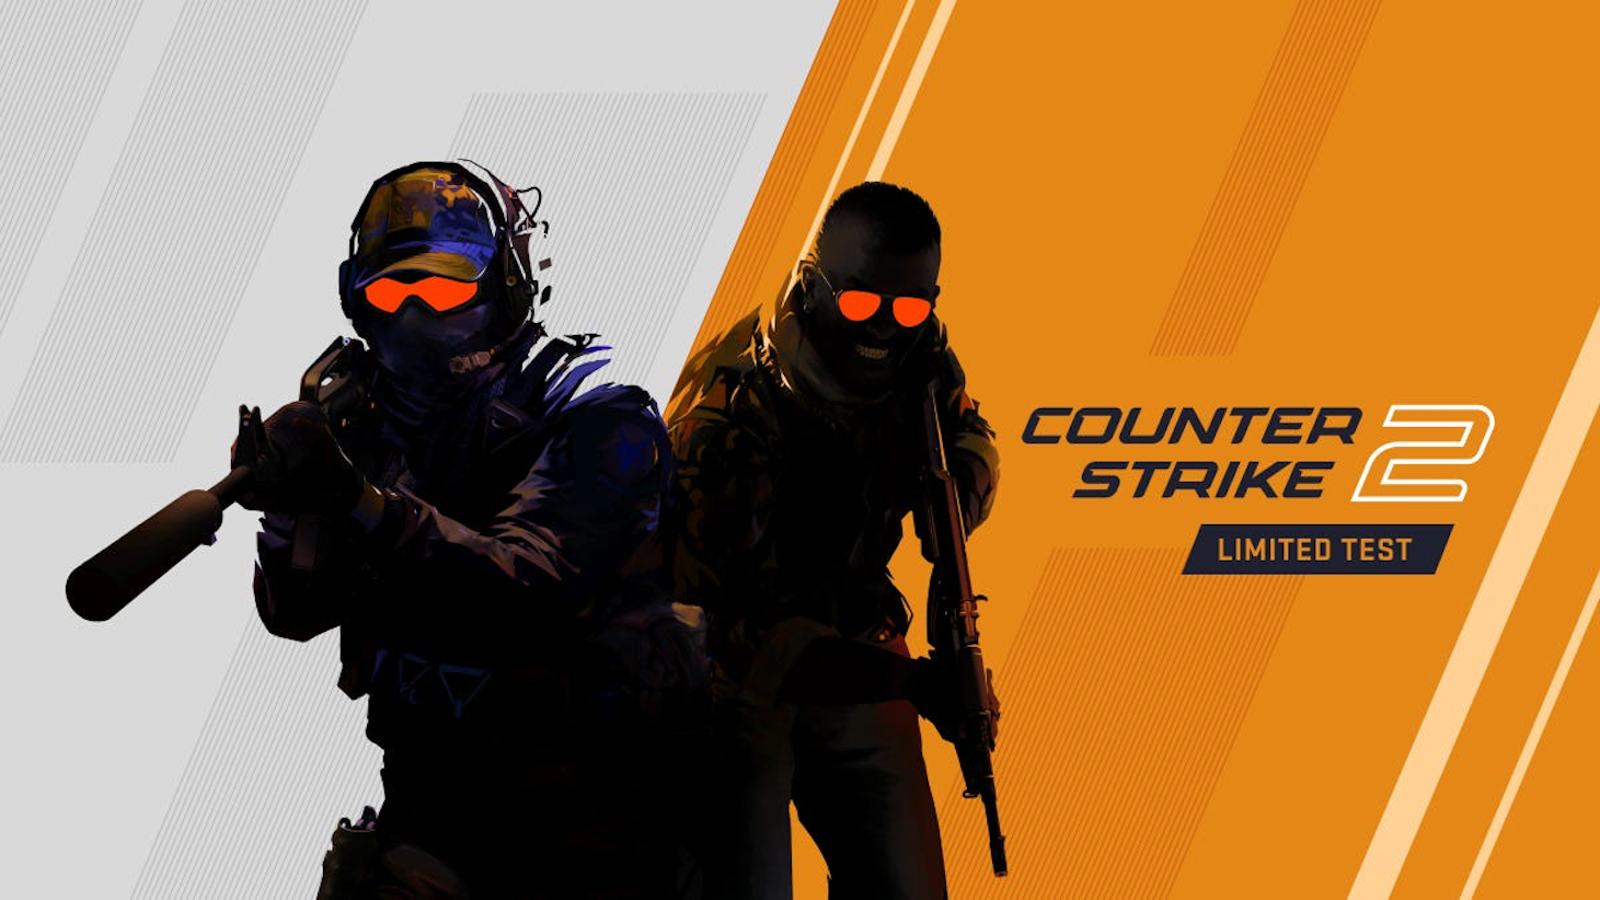 Counter-Strike 2: How To Get Into Limited Test